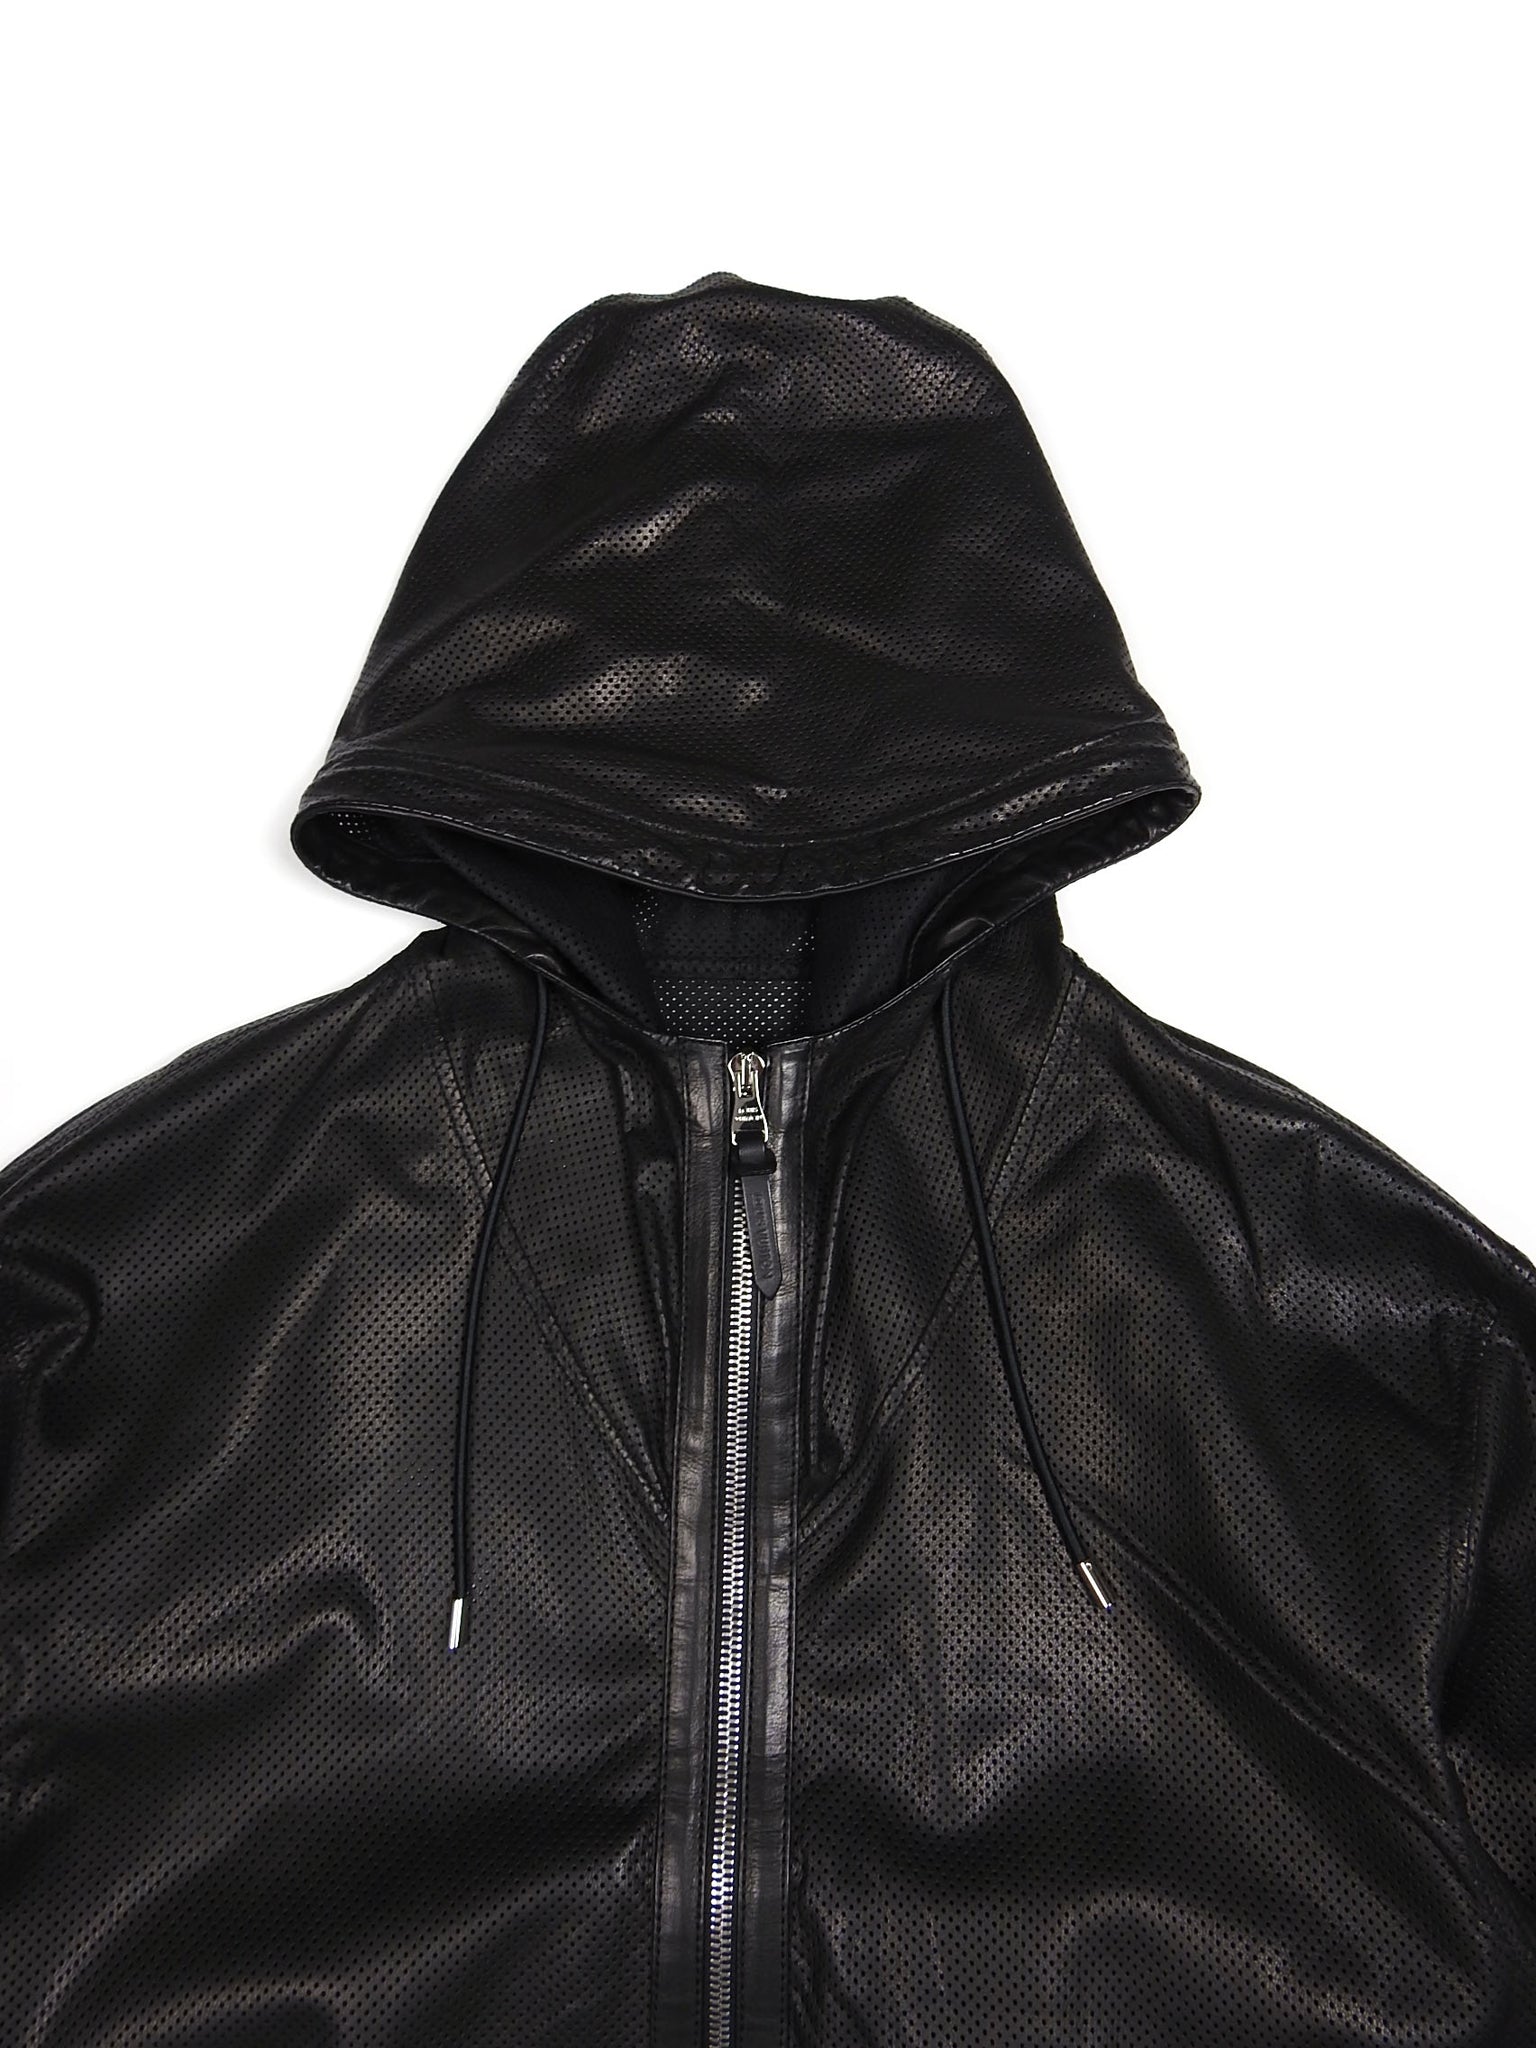 Louis Vuitton Black Perforated Leather Hooded Jacket Size 52 – I